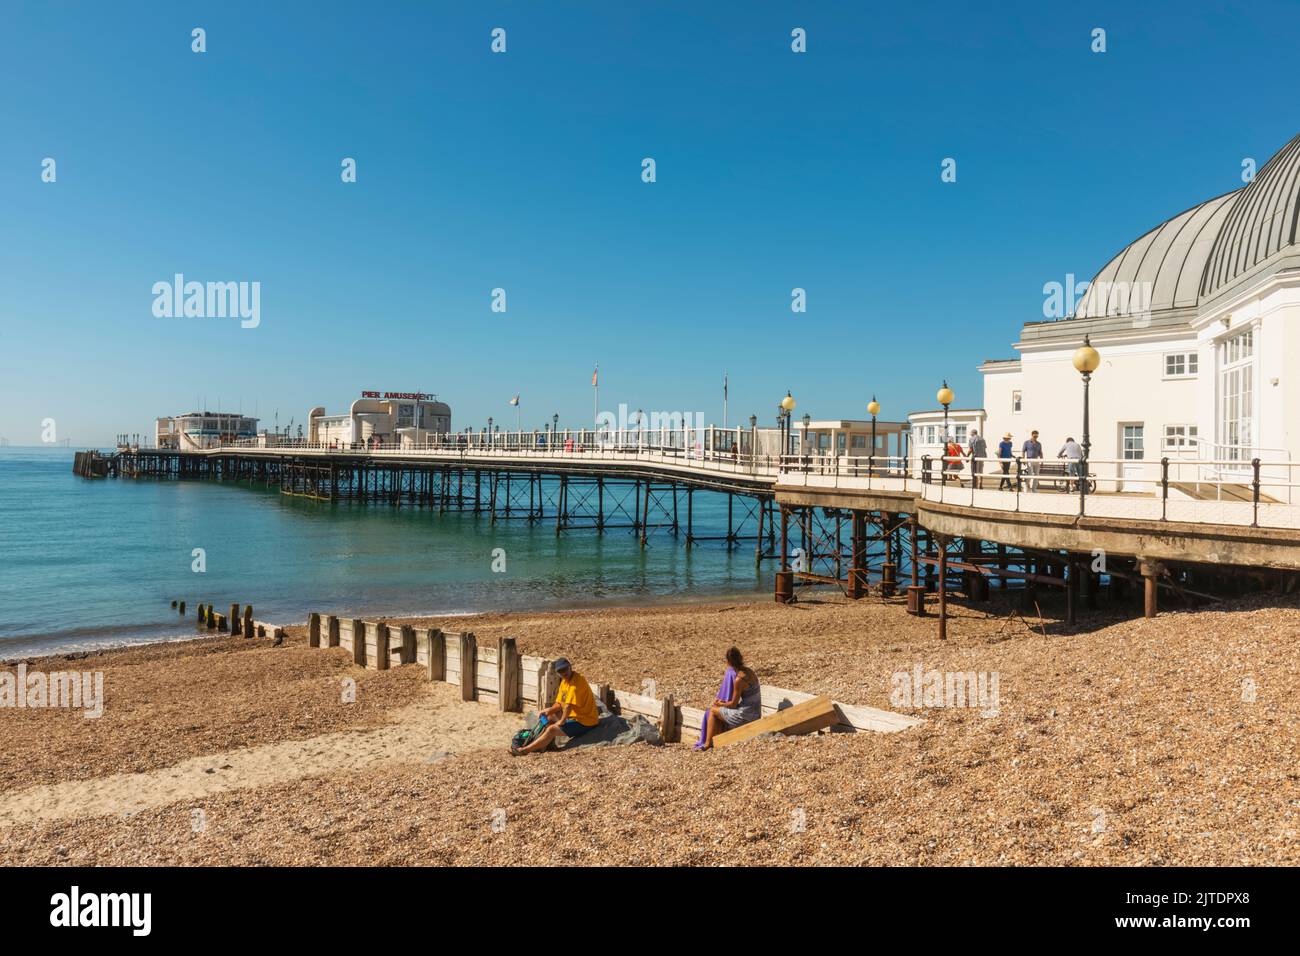 England, West Sussex, Worthing, Worthing Pier and Beach Stock Photo